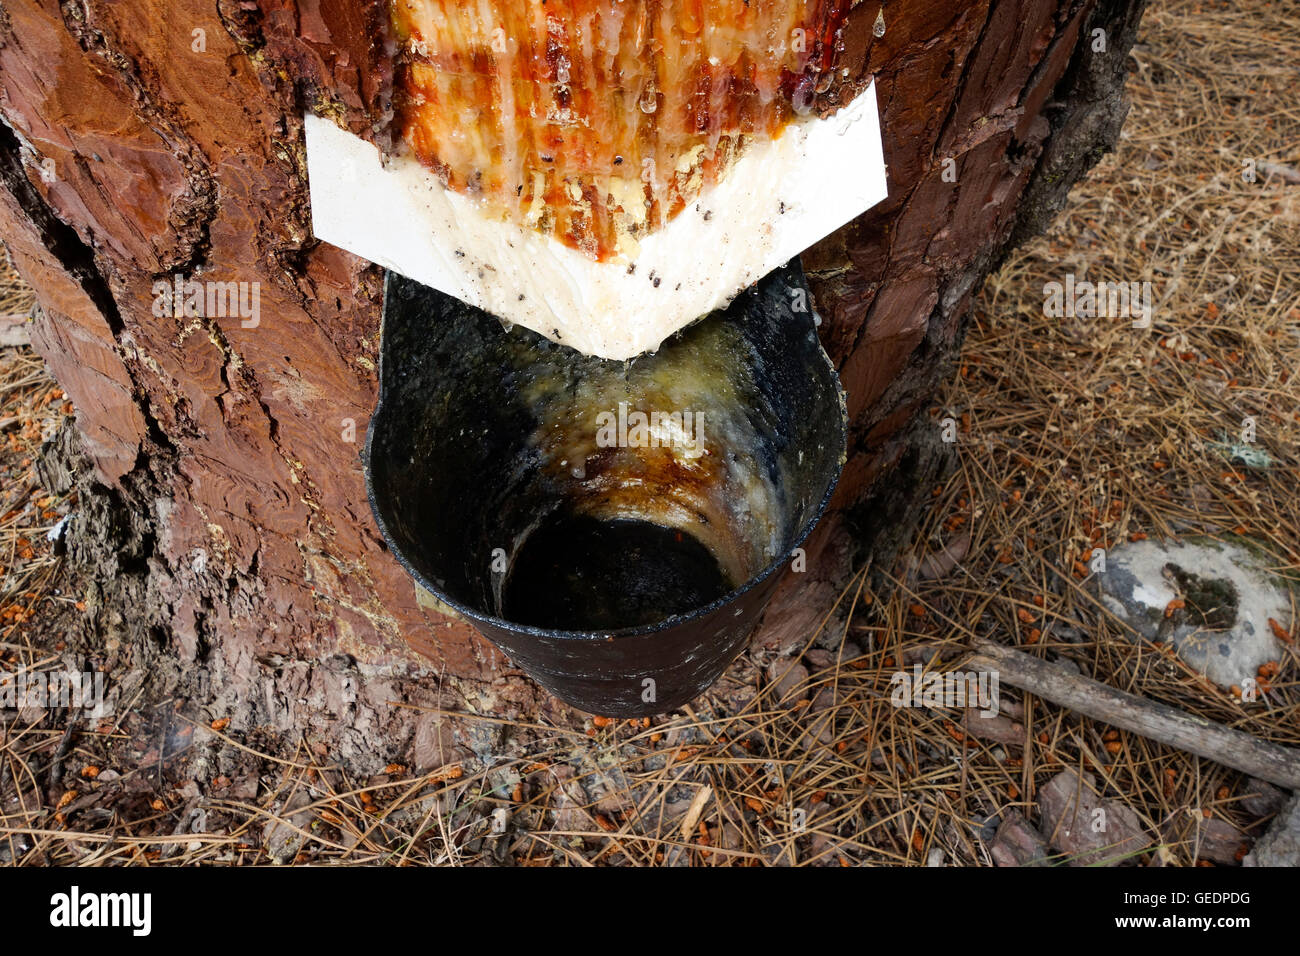 Resin extraction of pine tree in forest, Andalusia, Spain. Stock Photo